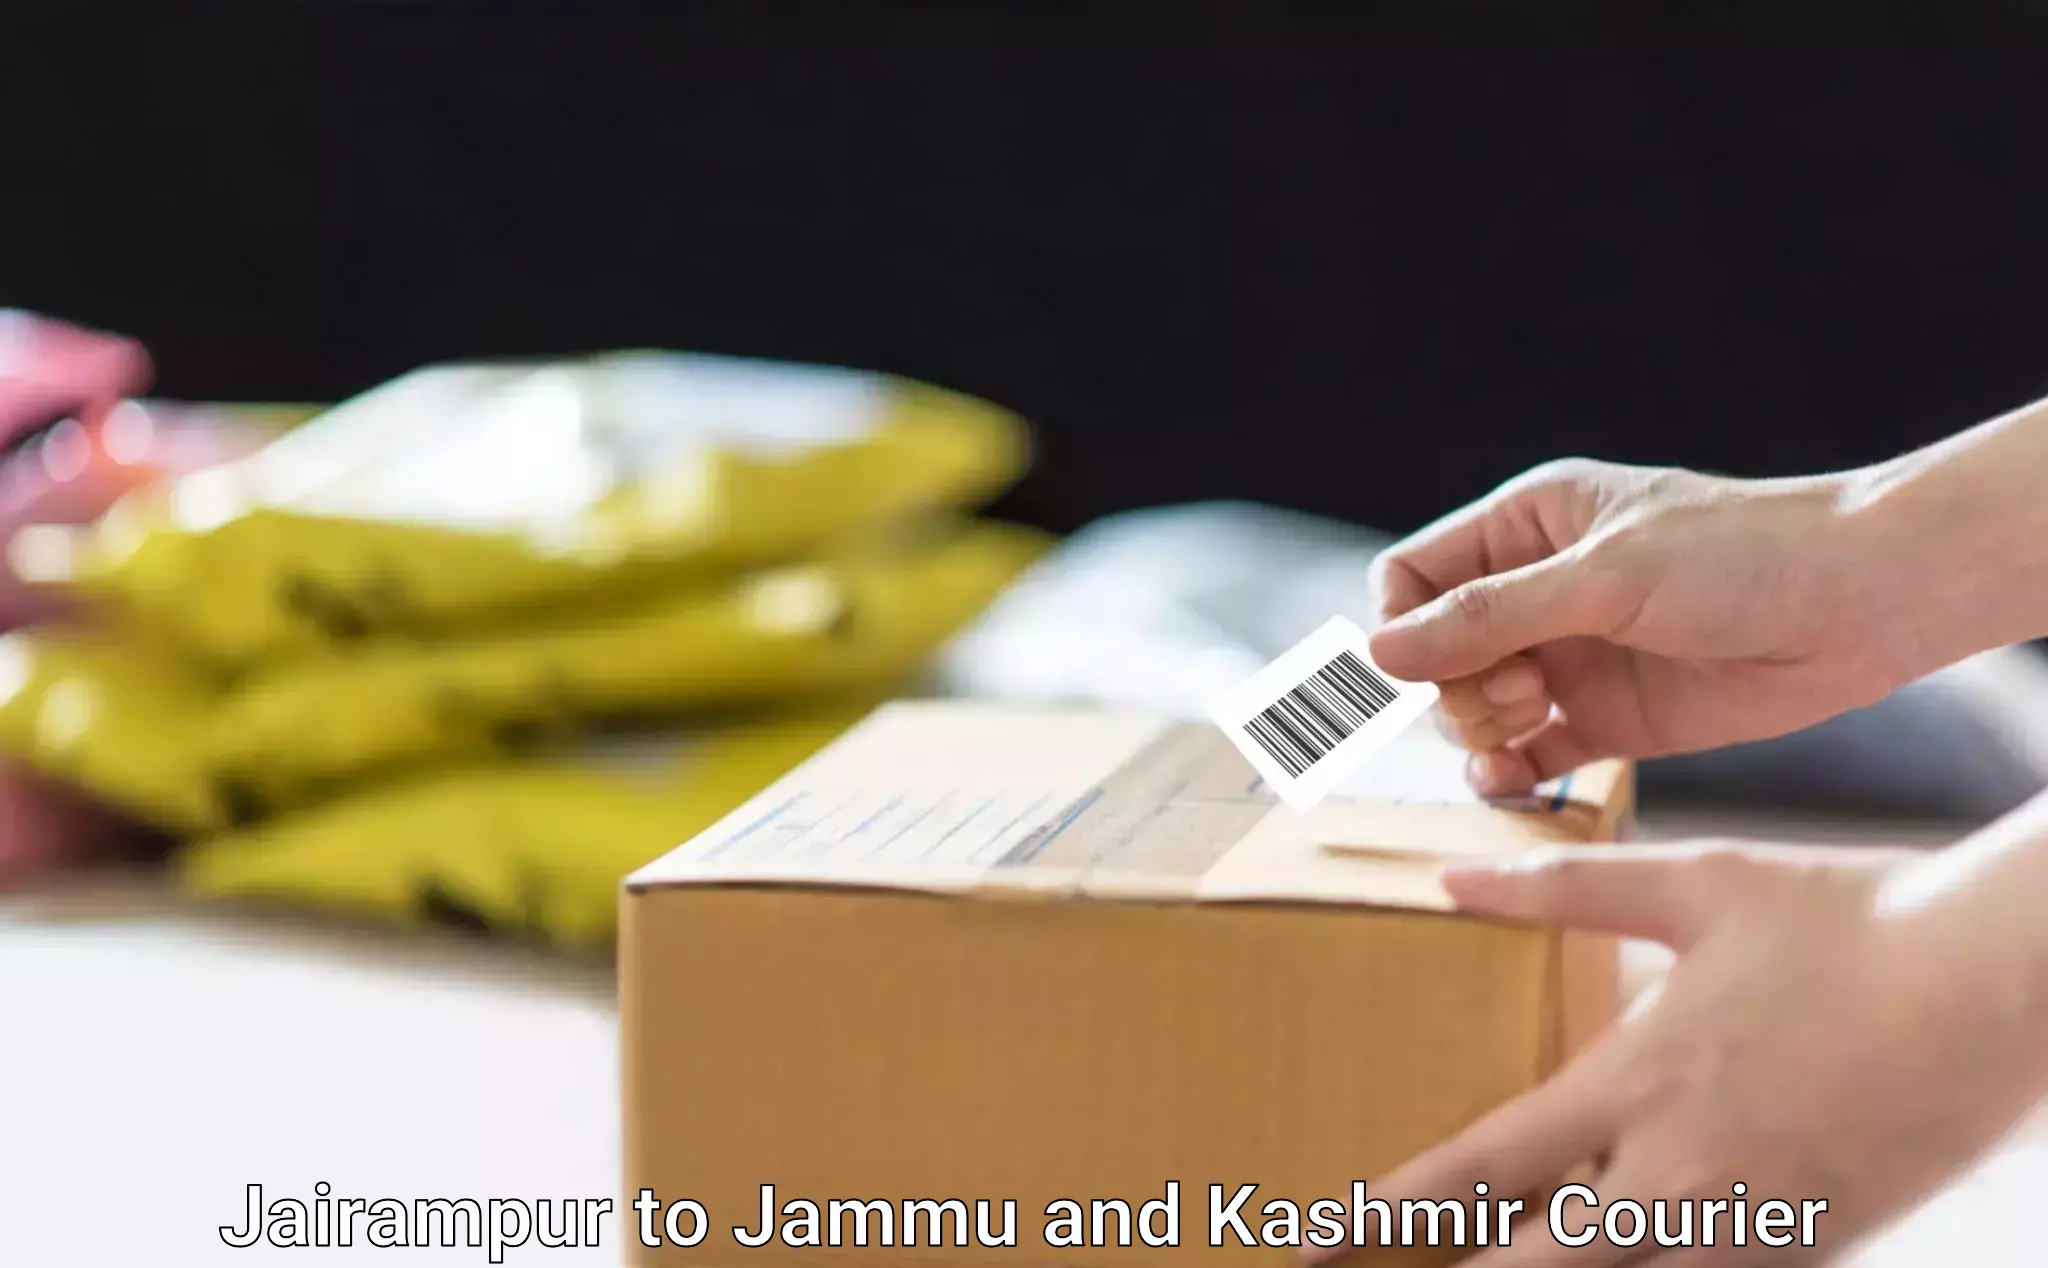 Affordable shipping solutions Jairampur to Jammu and Kashmir